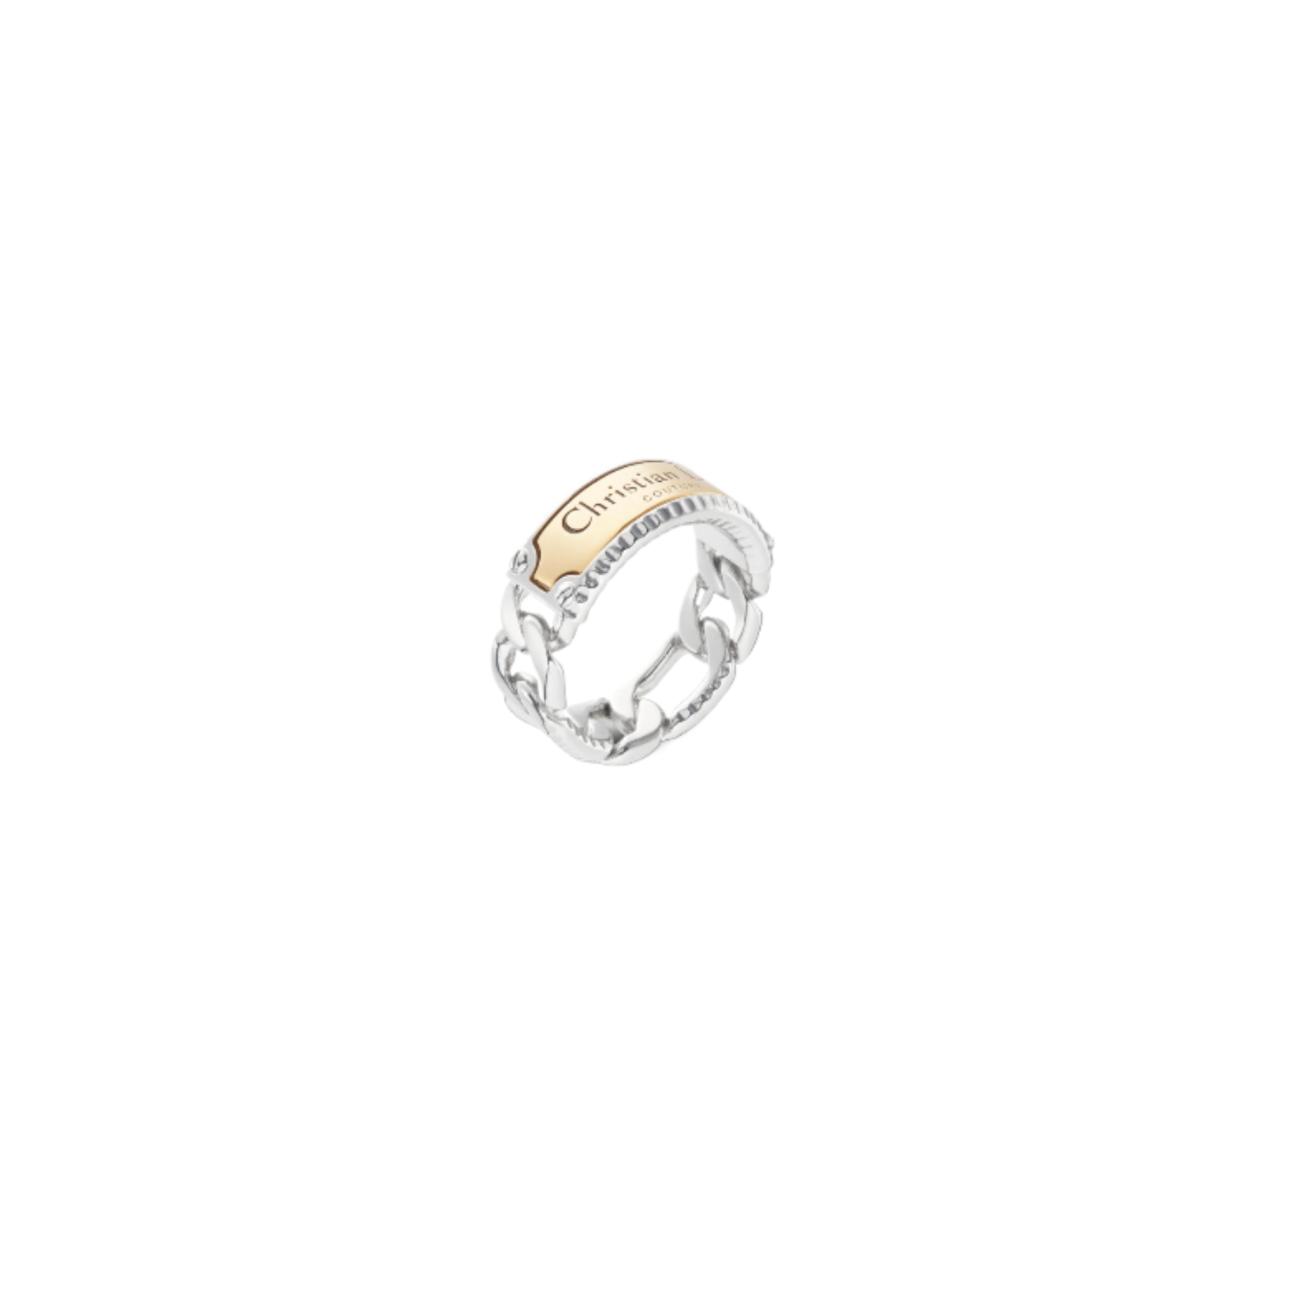 Couture chain link ANELLO ring